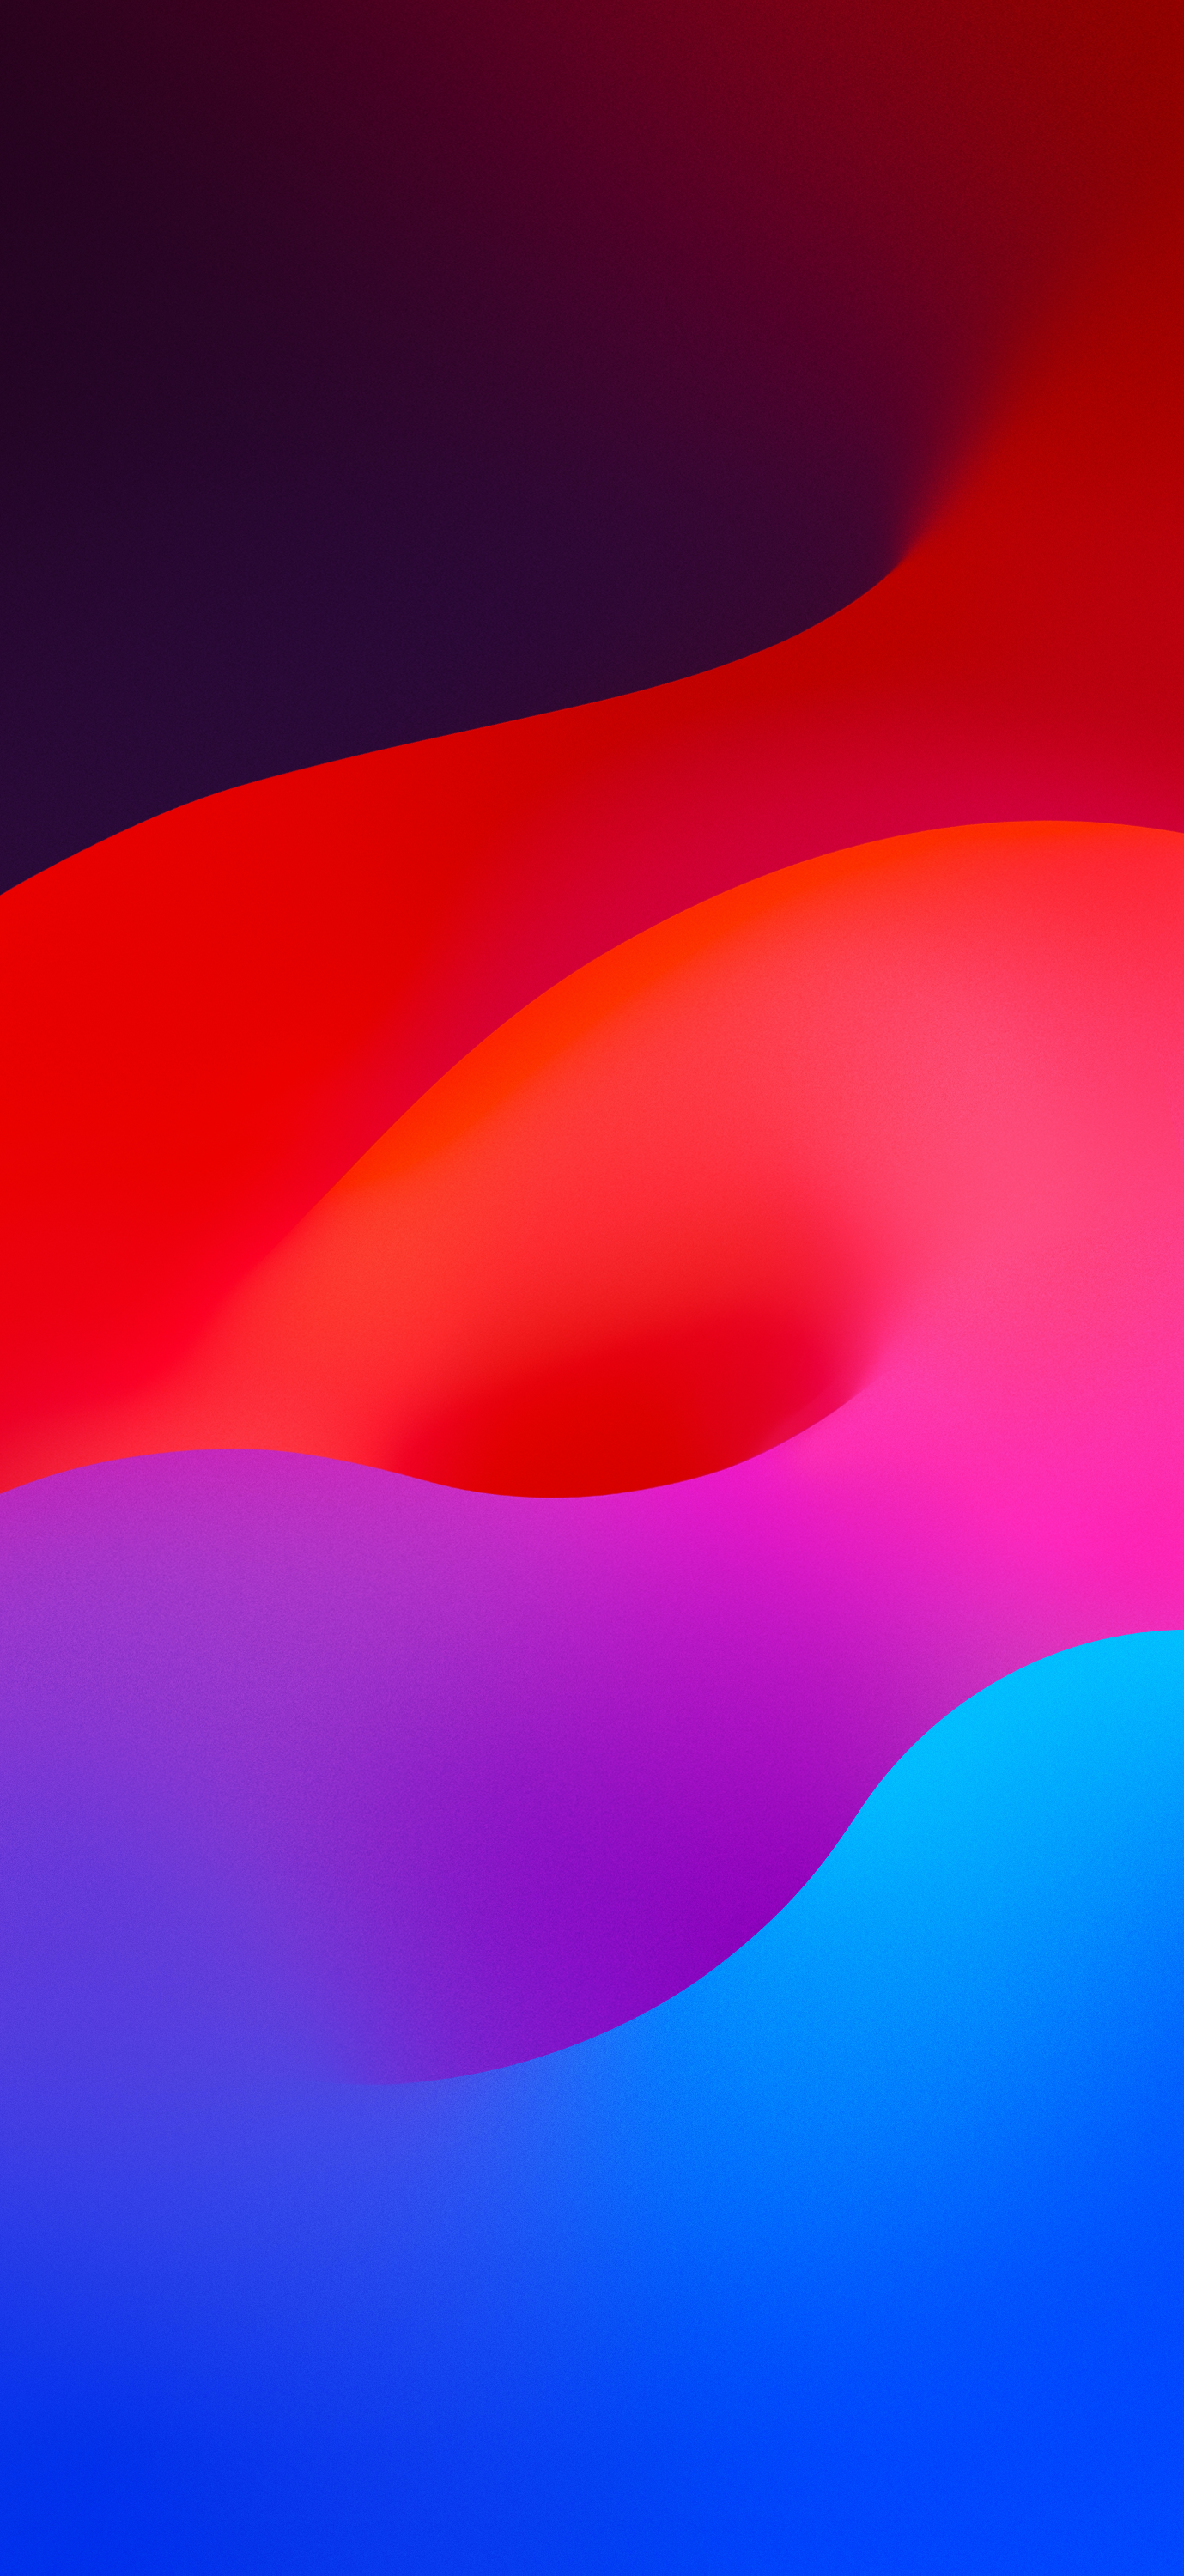 New wallpapers inspired by the 'Spring Loaded' Apple event products